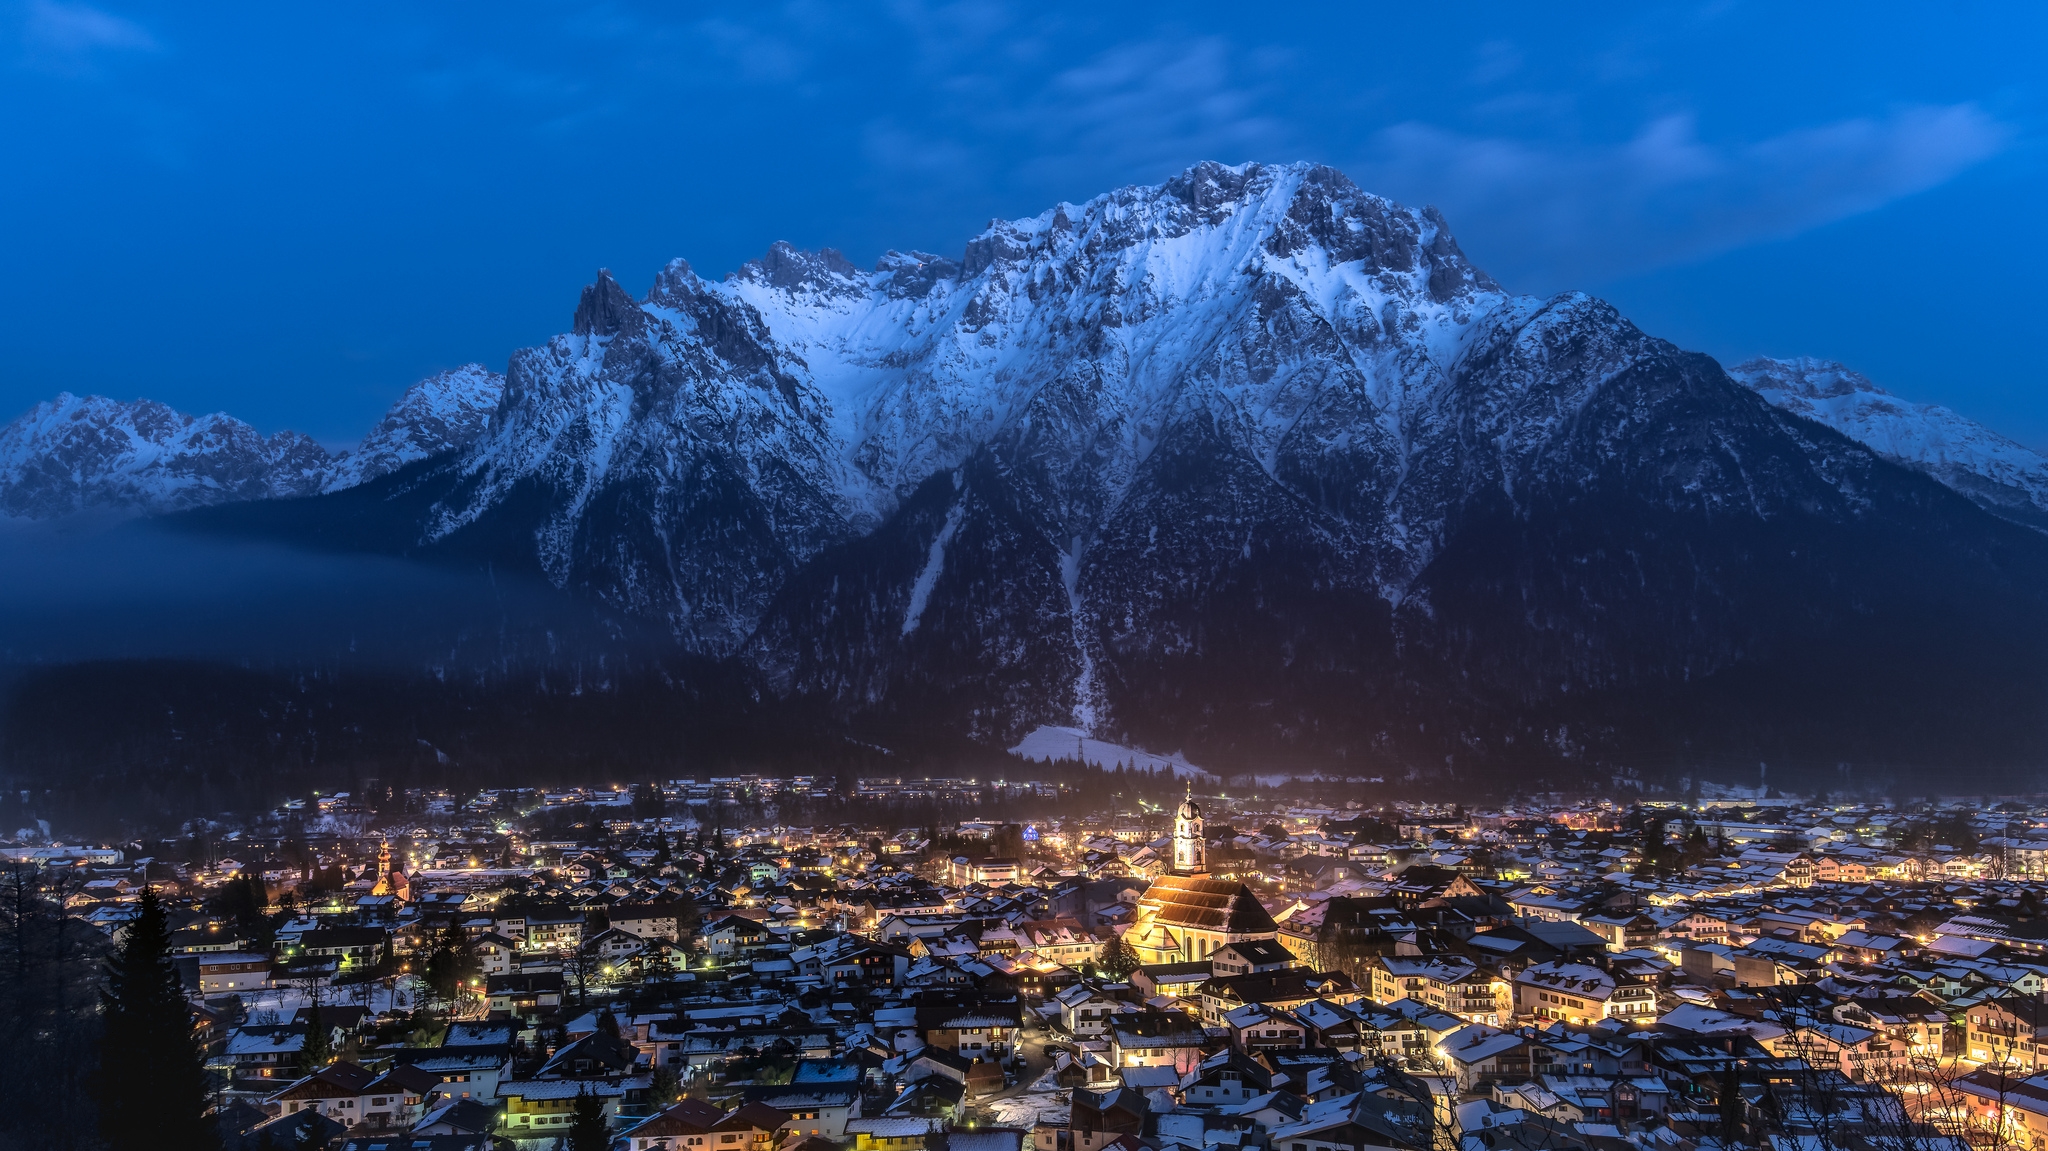 Wallpapers Mittenwald Germany mountain on the desktop